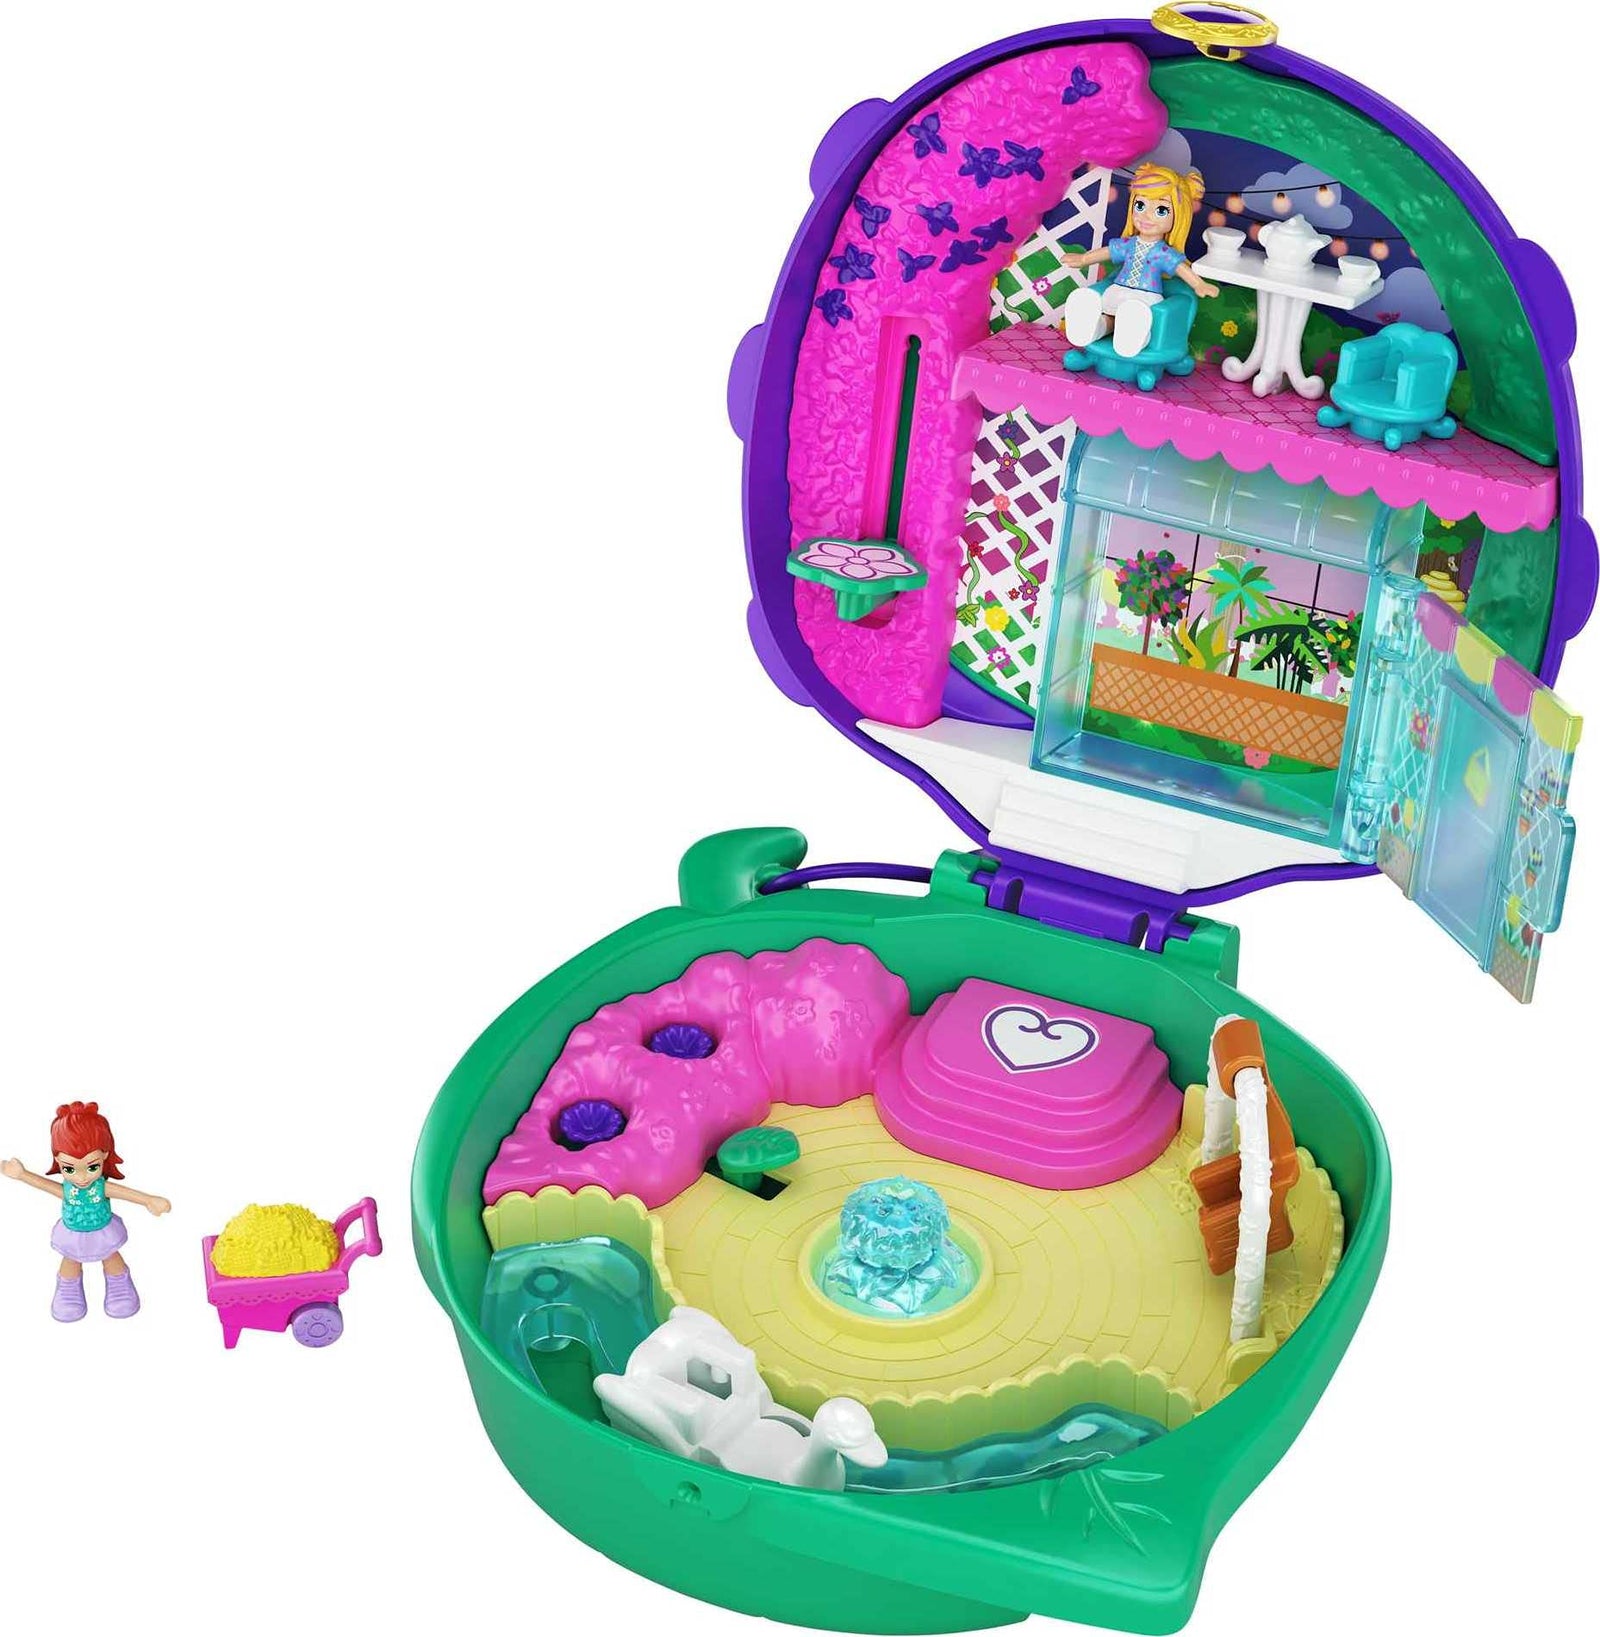 Polly Pocket Pocket World Lil’ Ladybug Garden Compact with Fun Reveals, Micro Polly and Lila Dolls, Wheelbarrow with Flowers and Sticker Sheet for Ages 4 and Up [Amazon Exclusive]